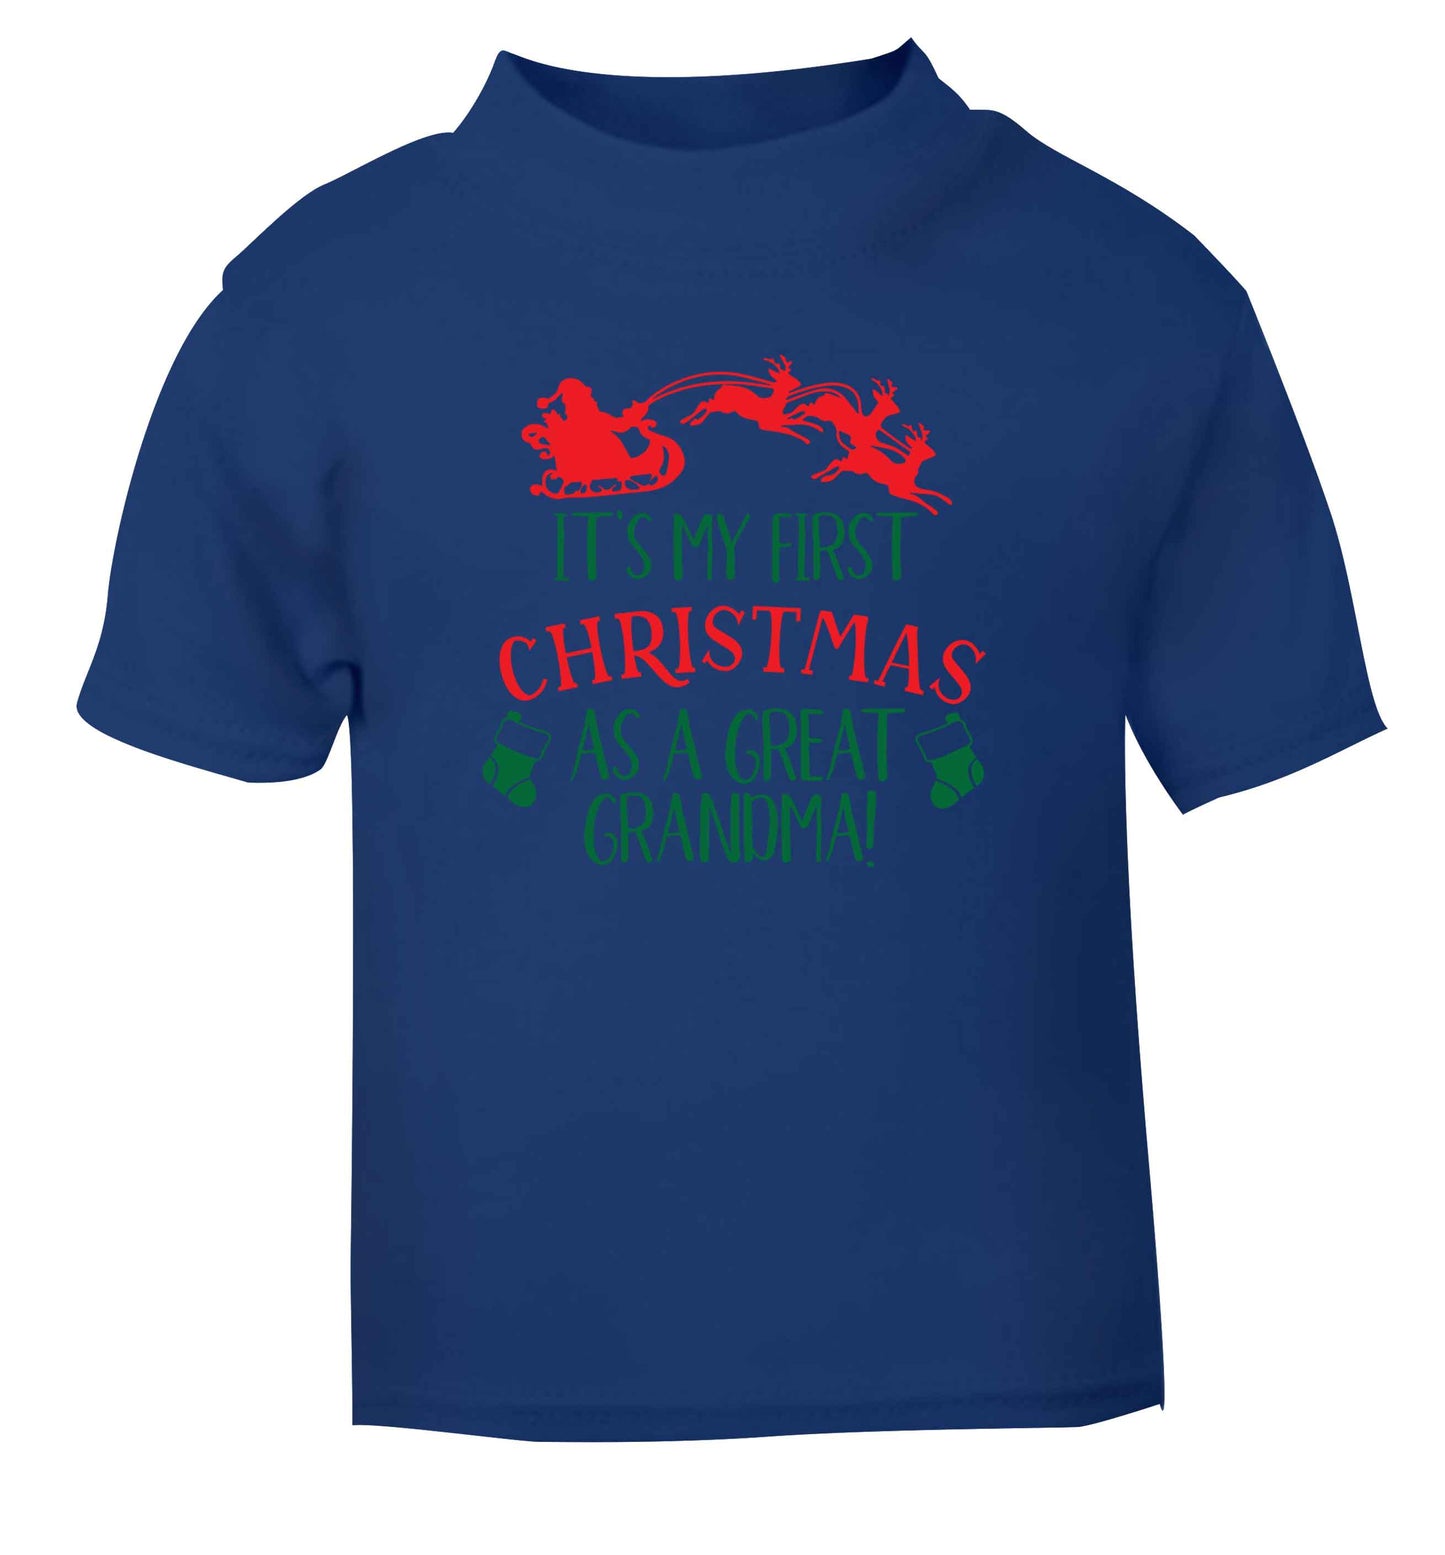 It's my first Christmas as a great grandma! blue Baby Toddler Tshirt 2 Years